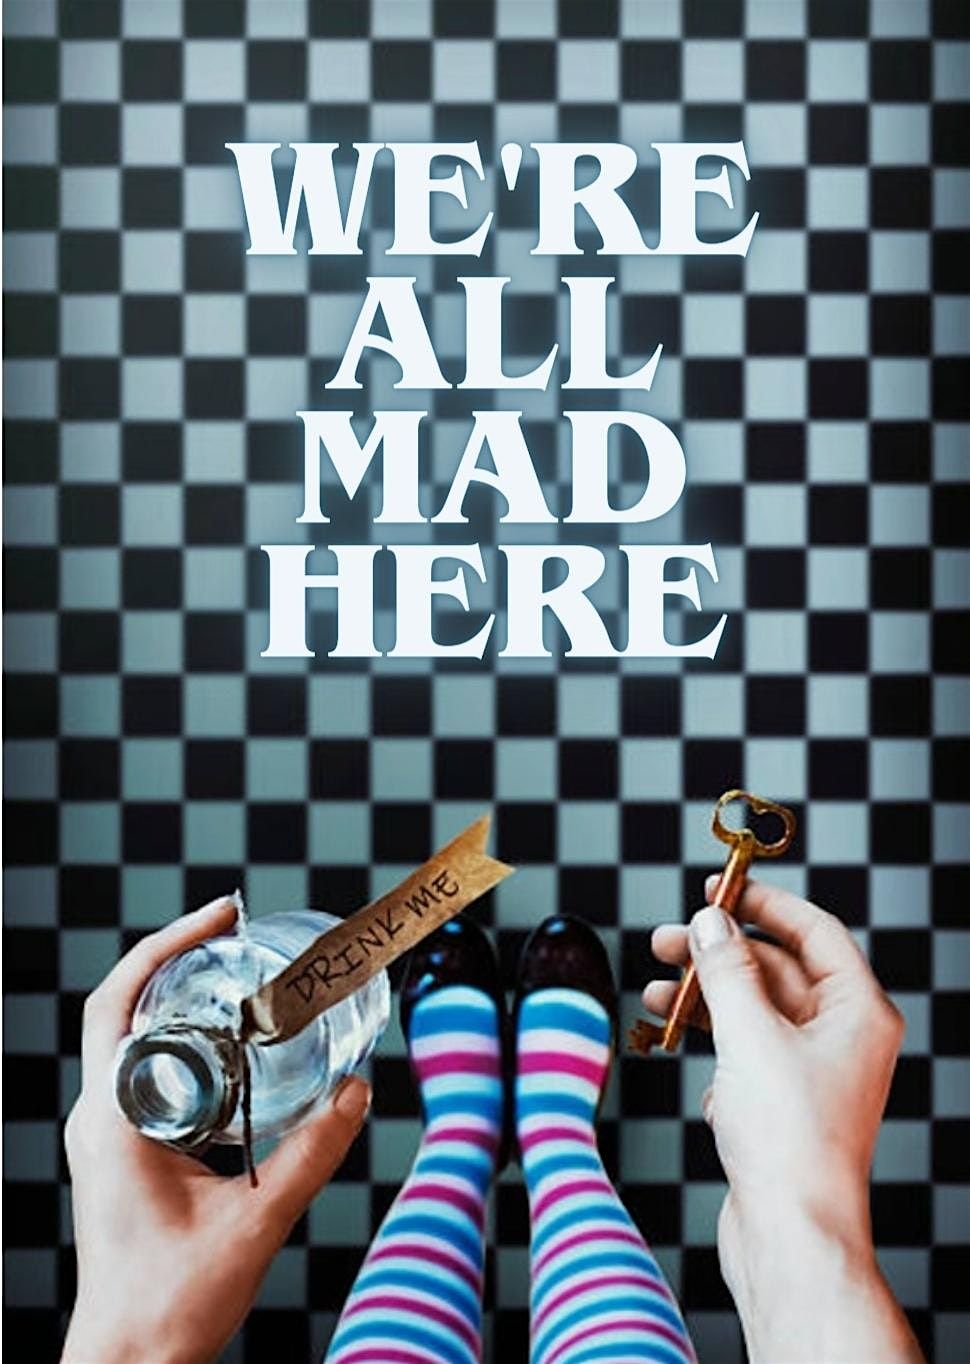 Madd Hatter Tea Party (Annual)